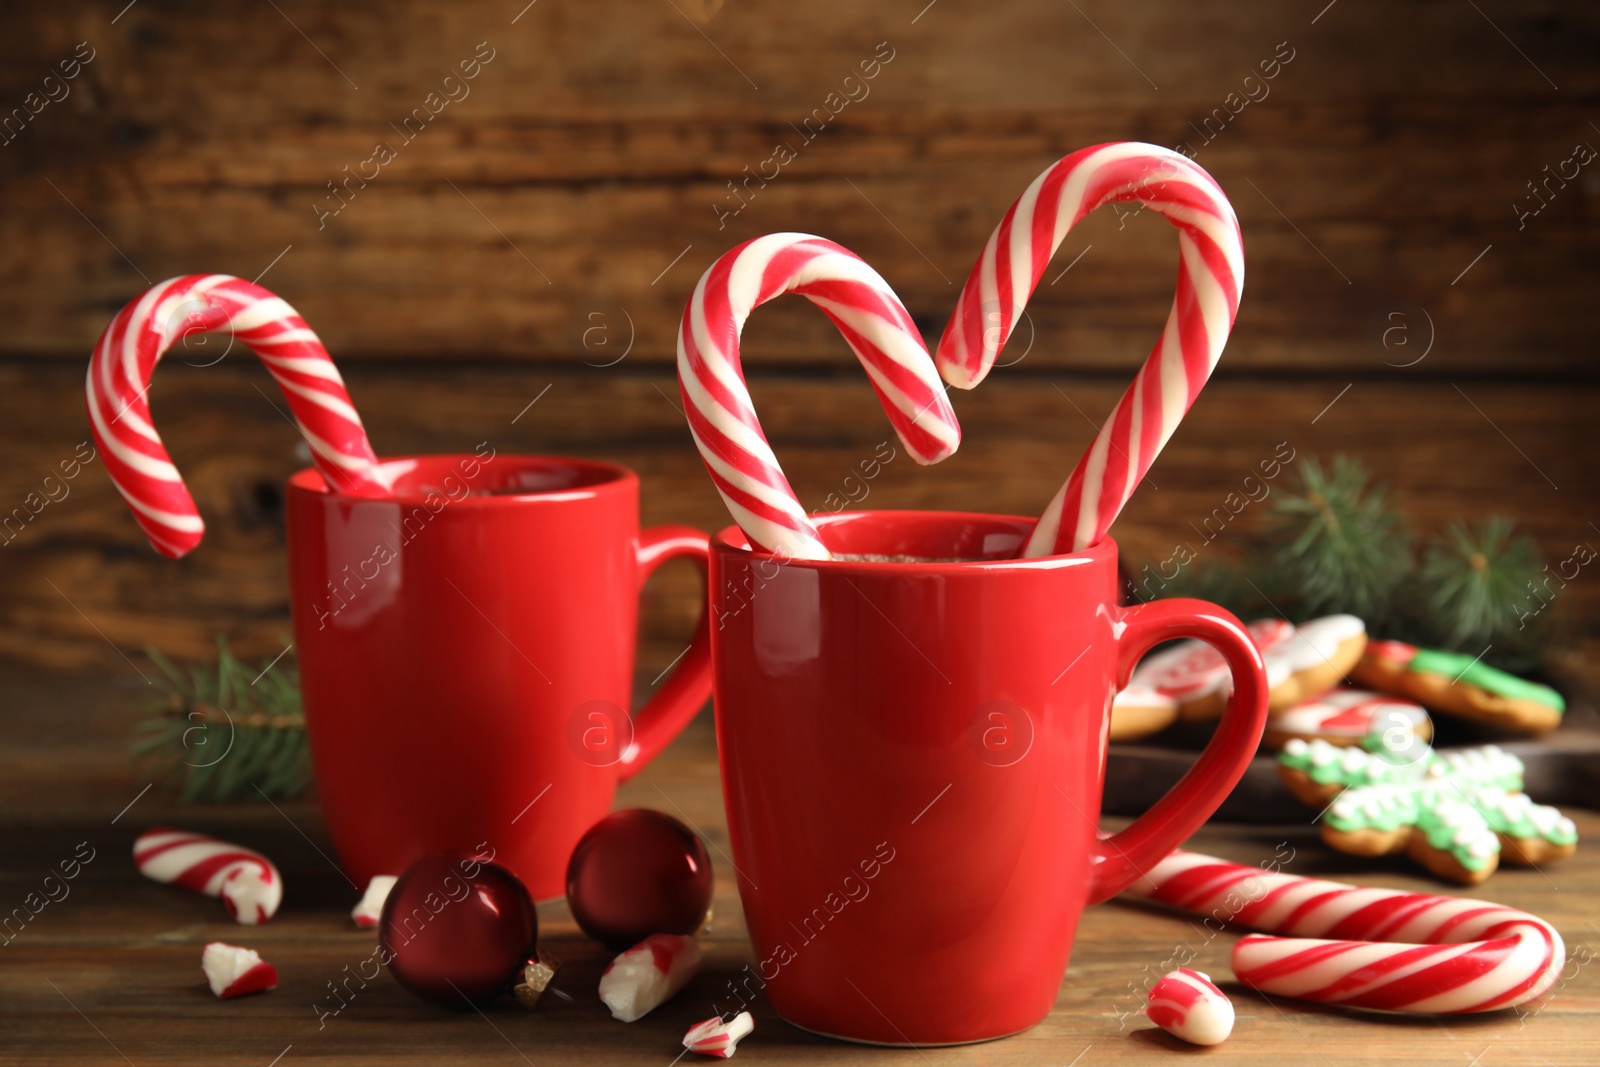 Photo of Cups of hot chocolate with candy canes and Christmas decor on wooden table